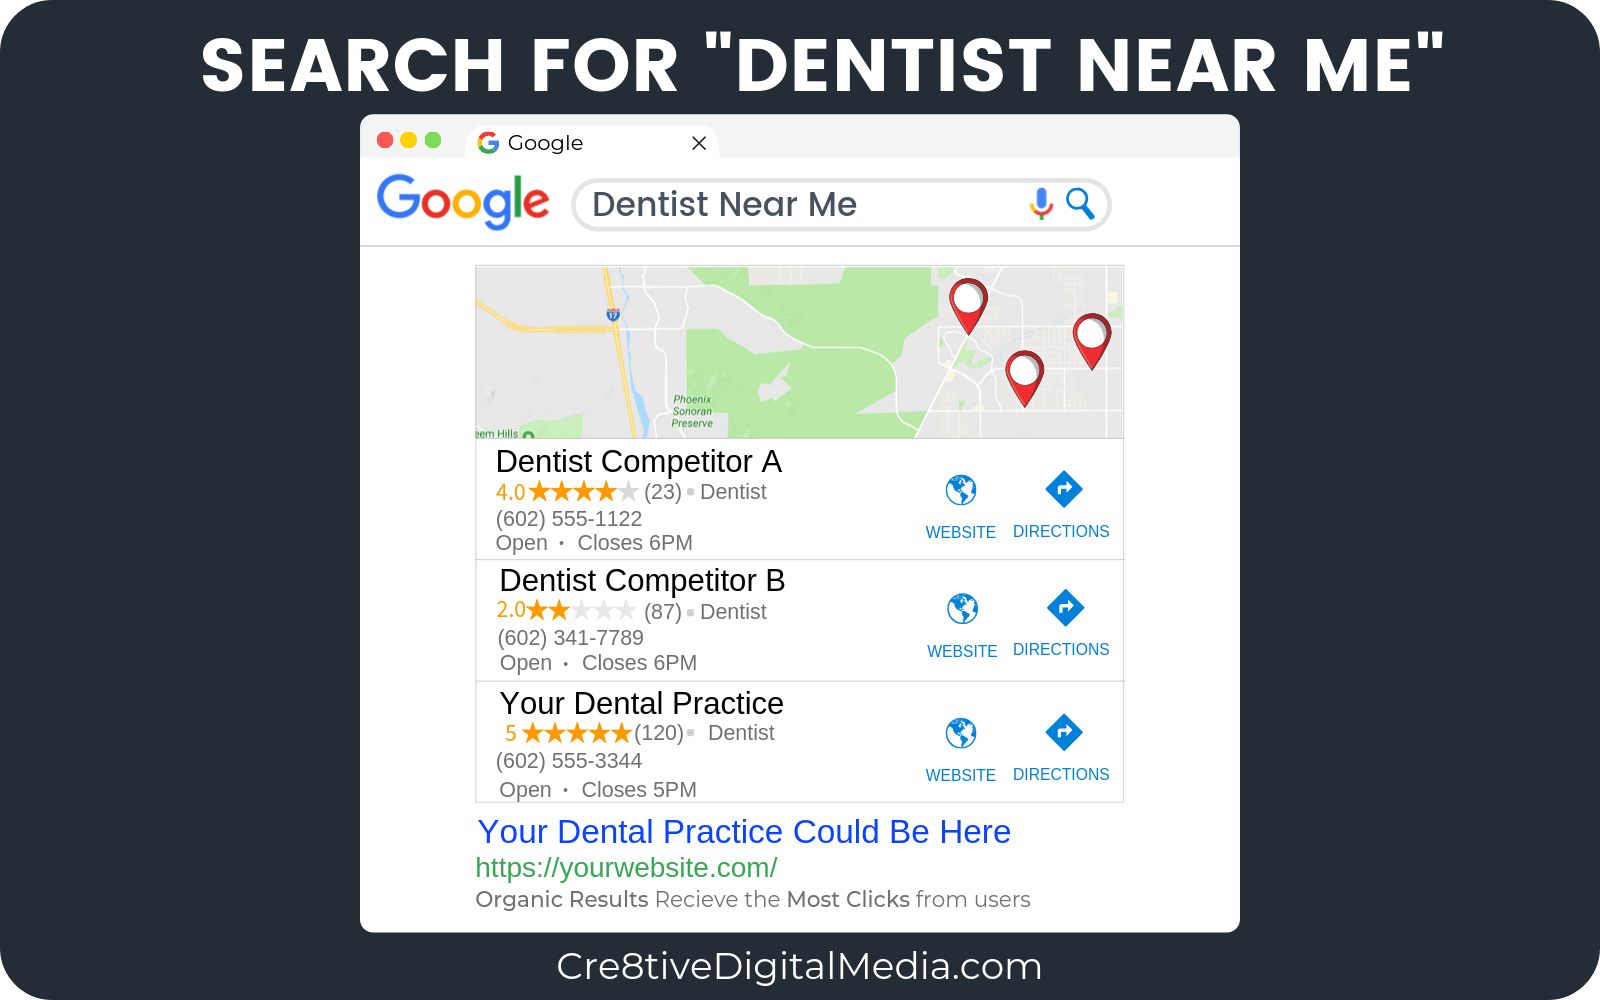 Google Search For “Dentists Near Me”